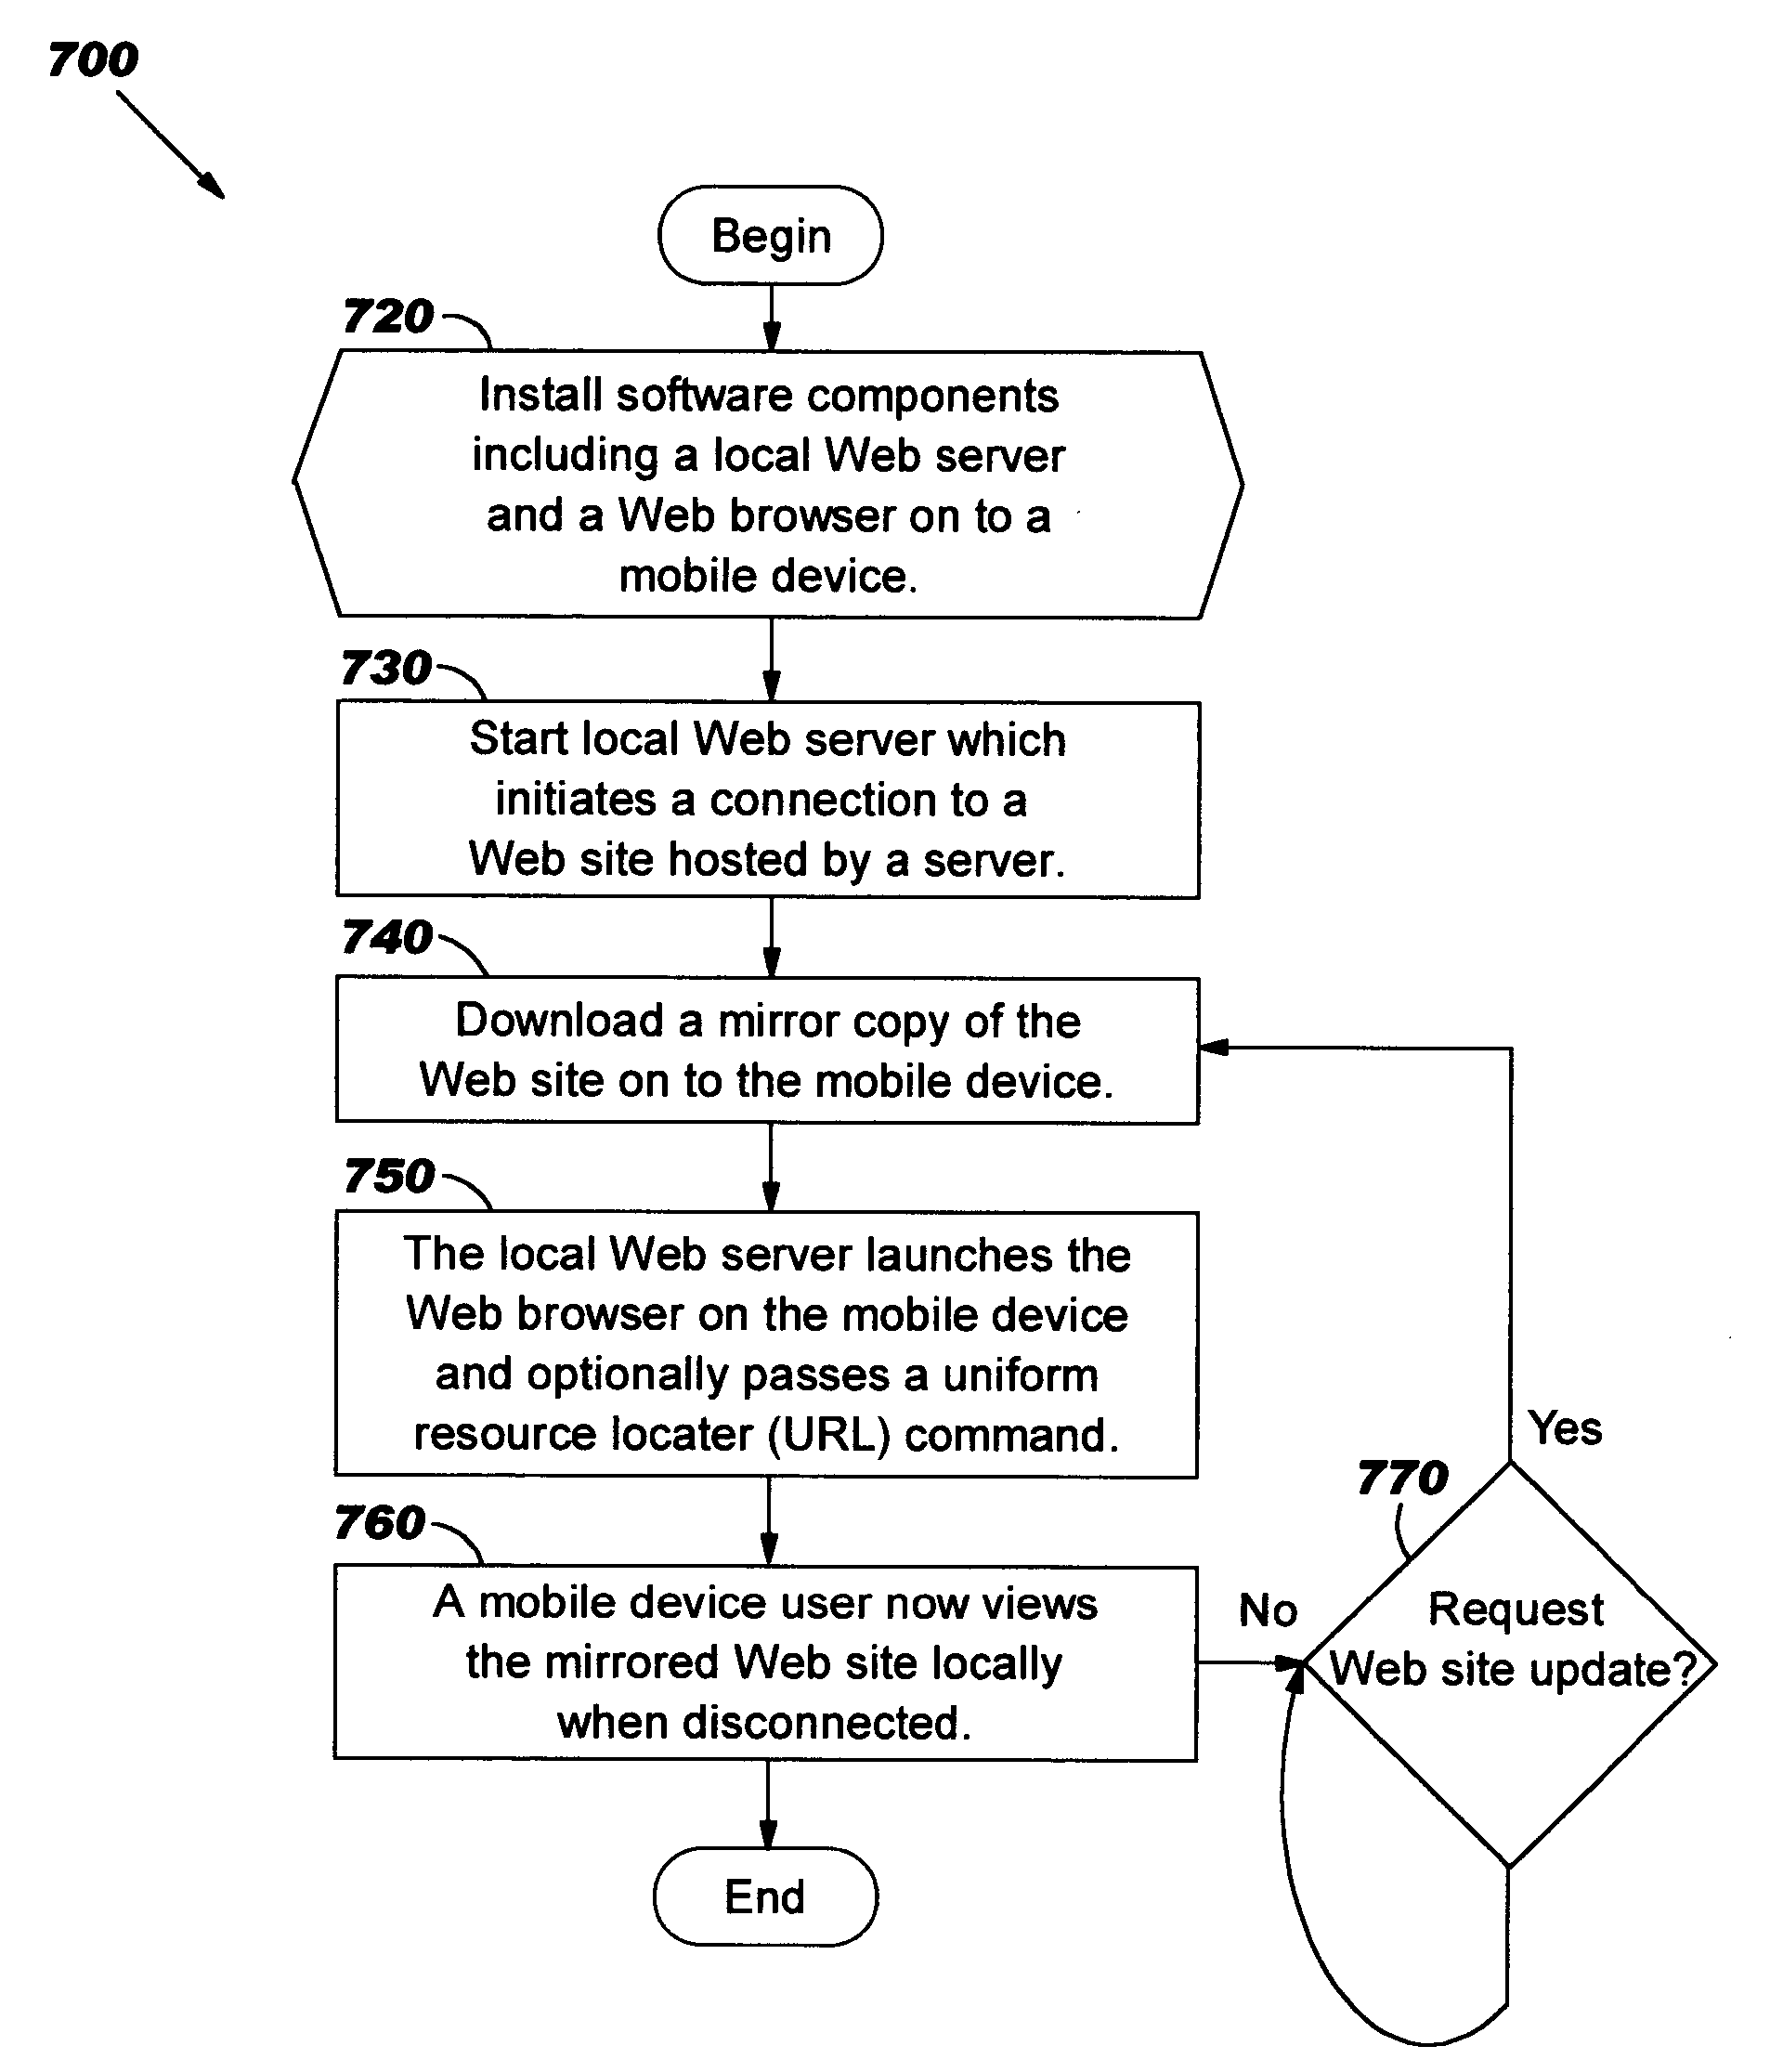 Transport and administration model for offline browsing